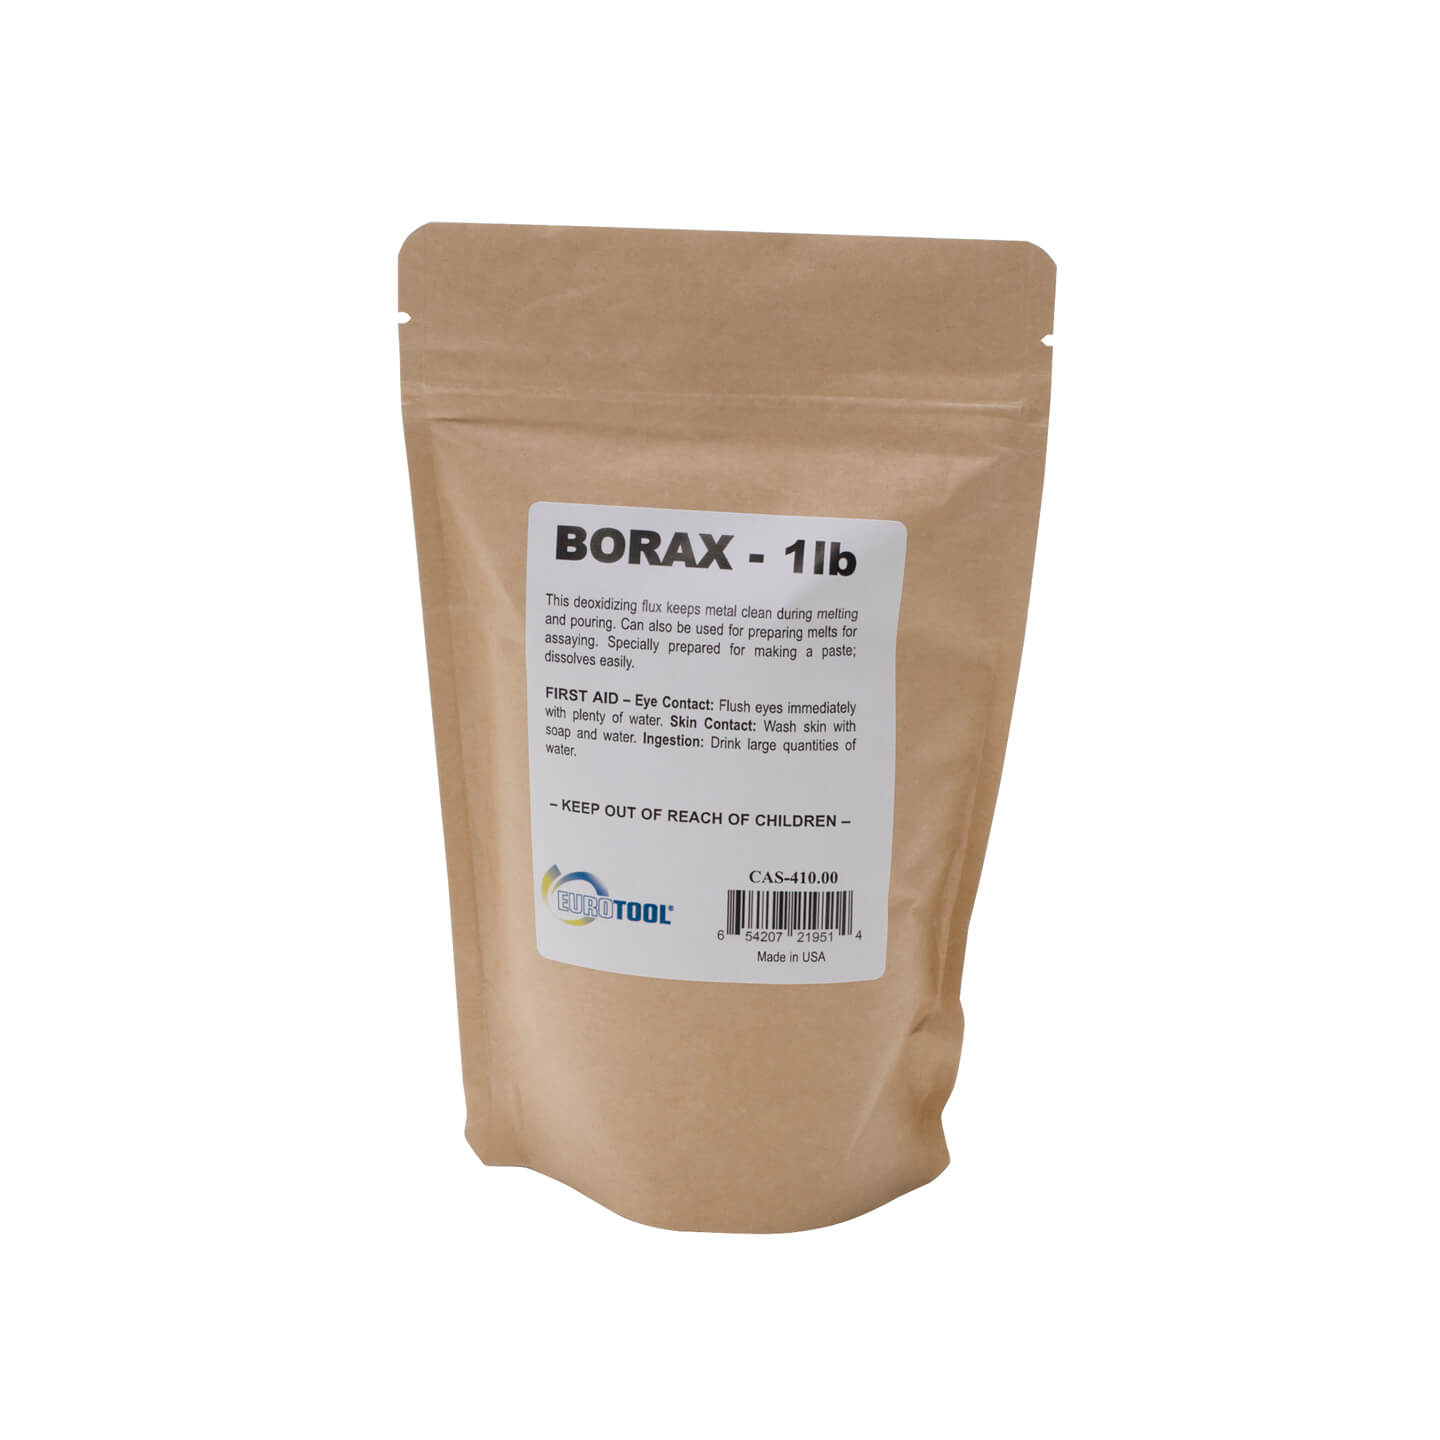  1 Lb 16 Oz Anhydrous Borax Granular Graphite Crucible Powder  Deoxidizing Casting Flux for Melting Assaying Refining Gold Silver Copper  Separating Impurities : Arts, Crafts & Sewing